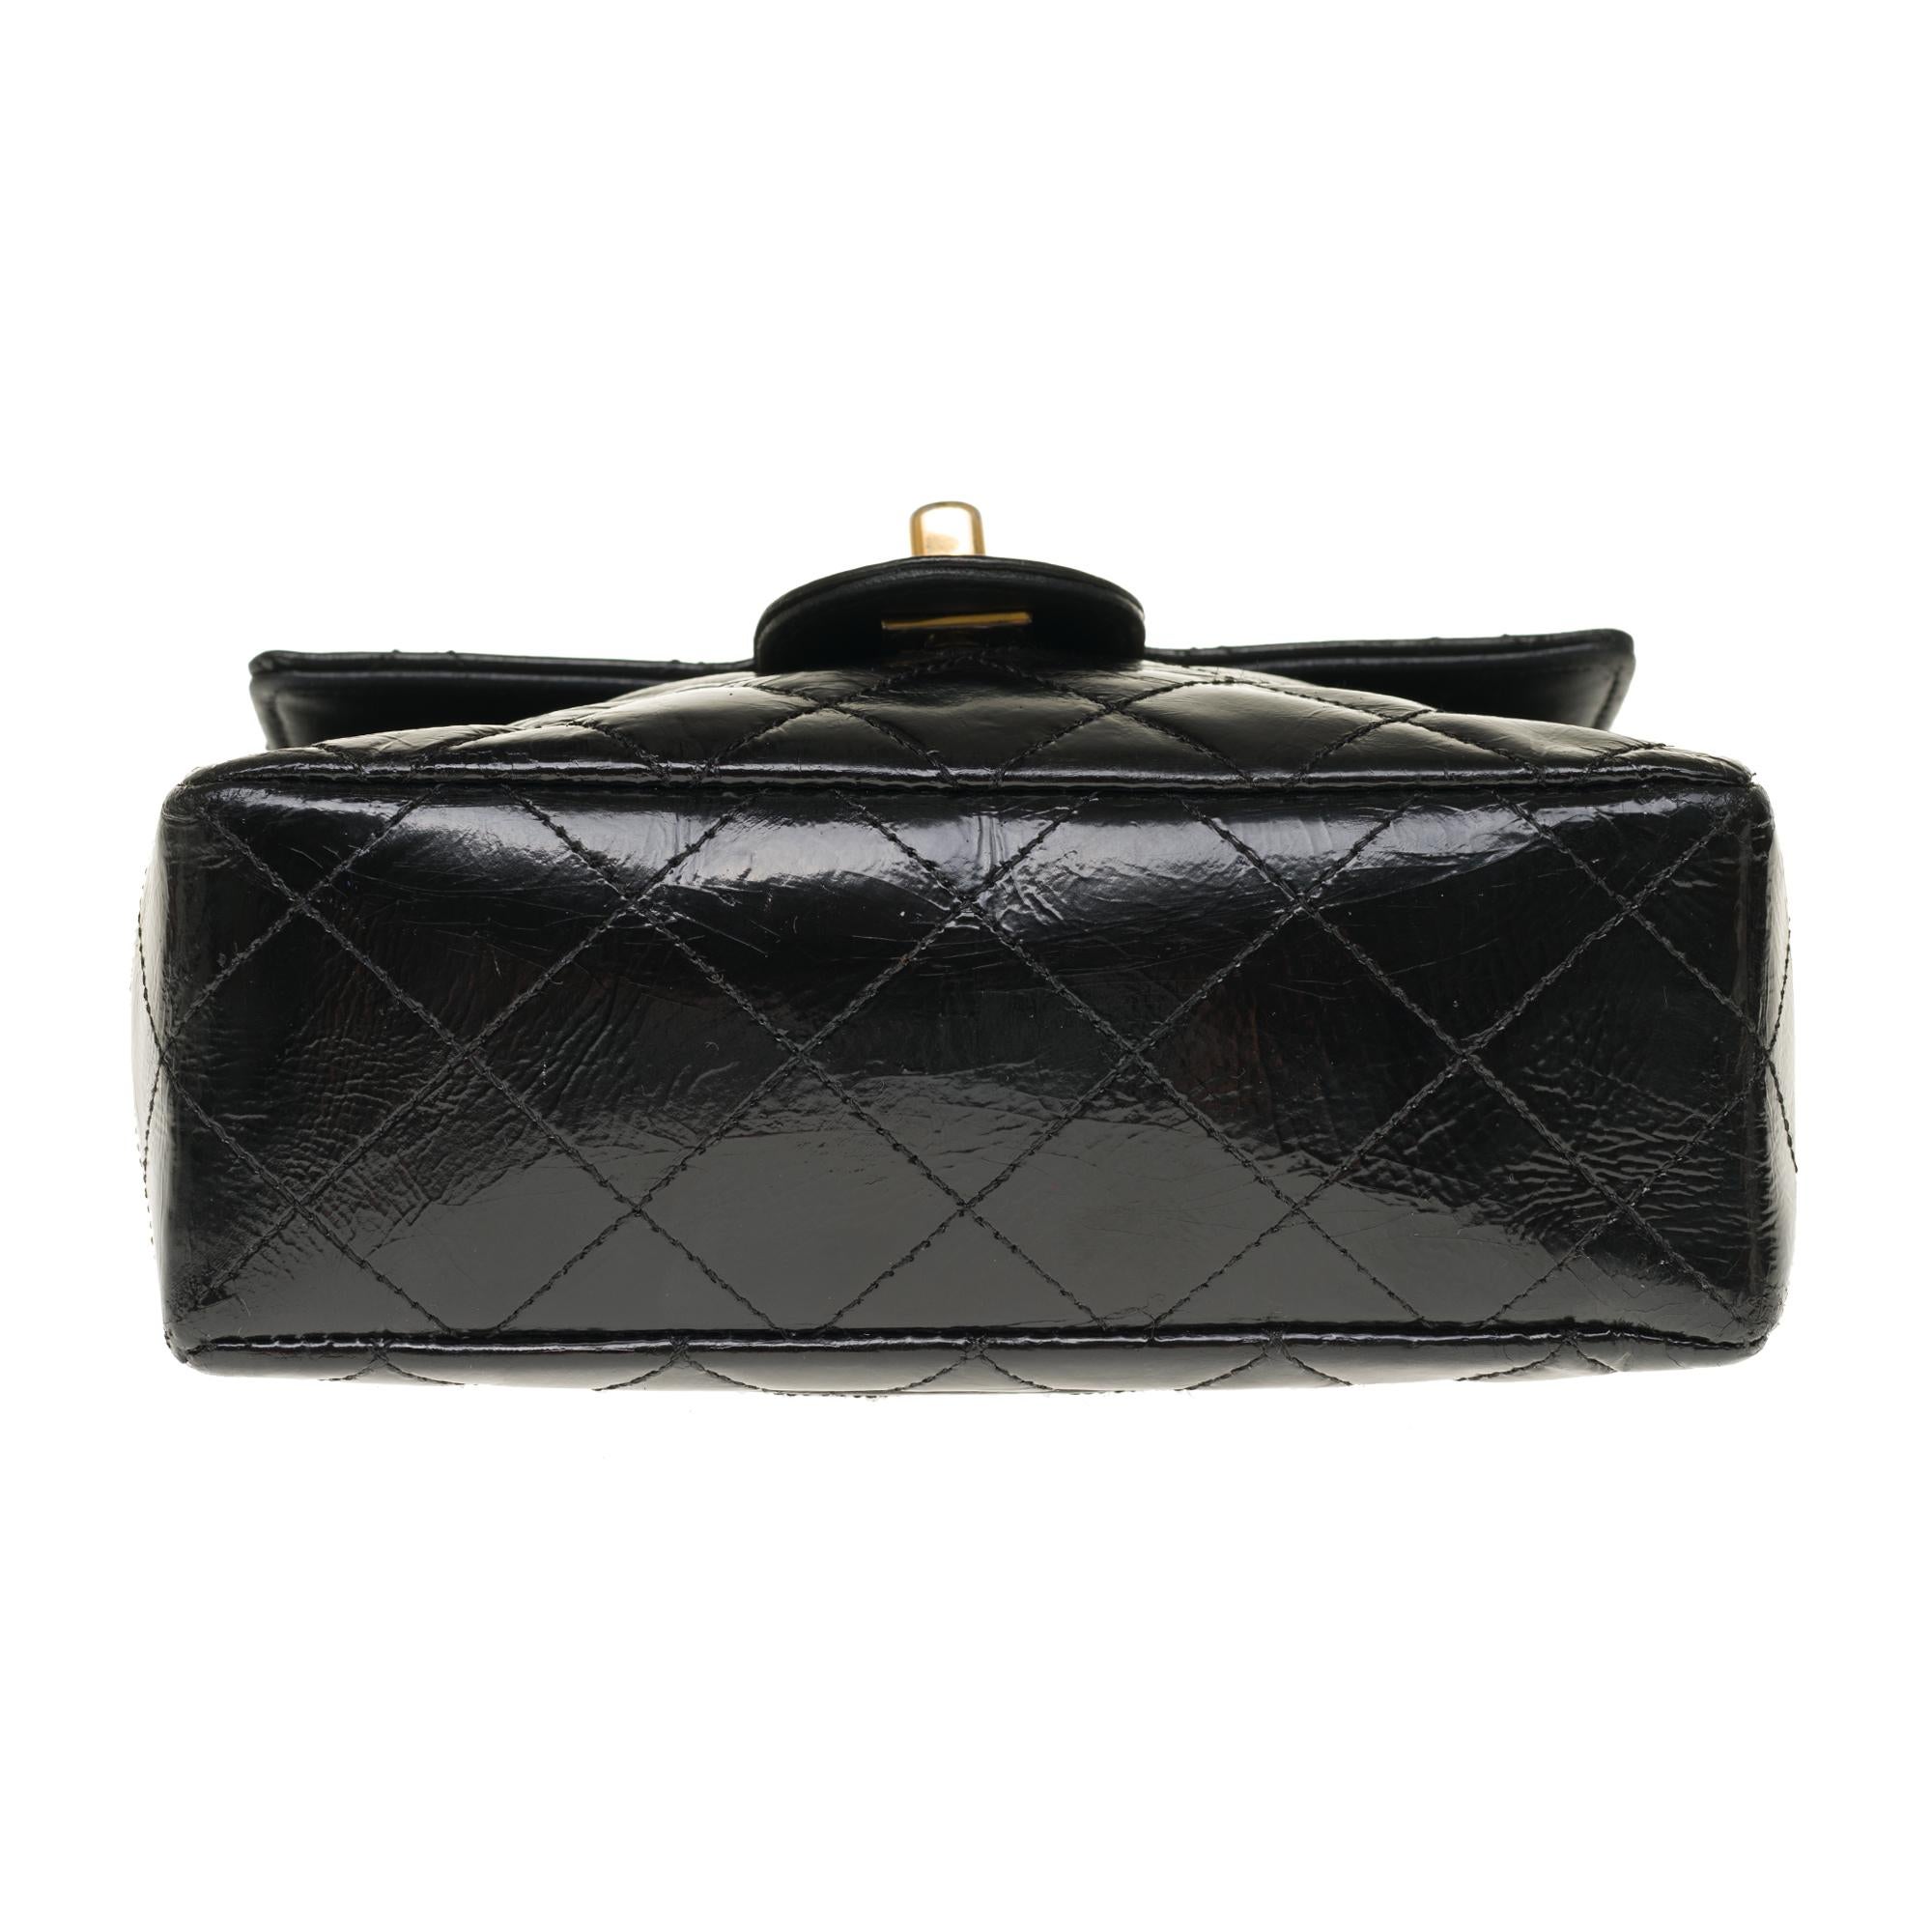 Chanel Mini square handbag in black quilted patent leather, gold hardware 1